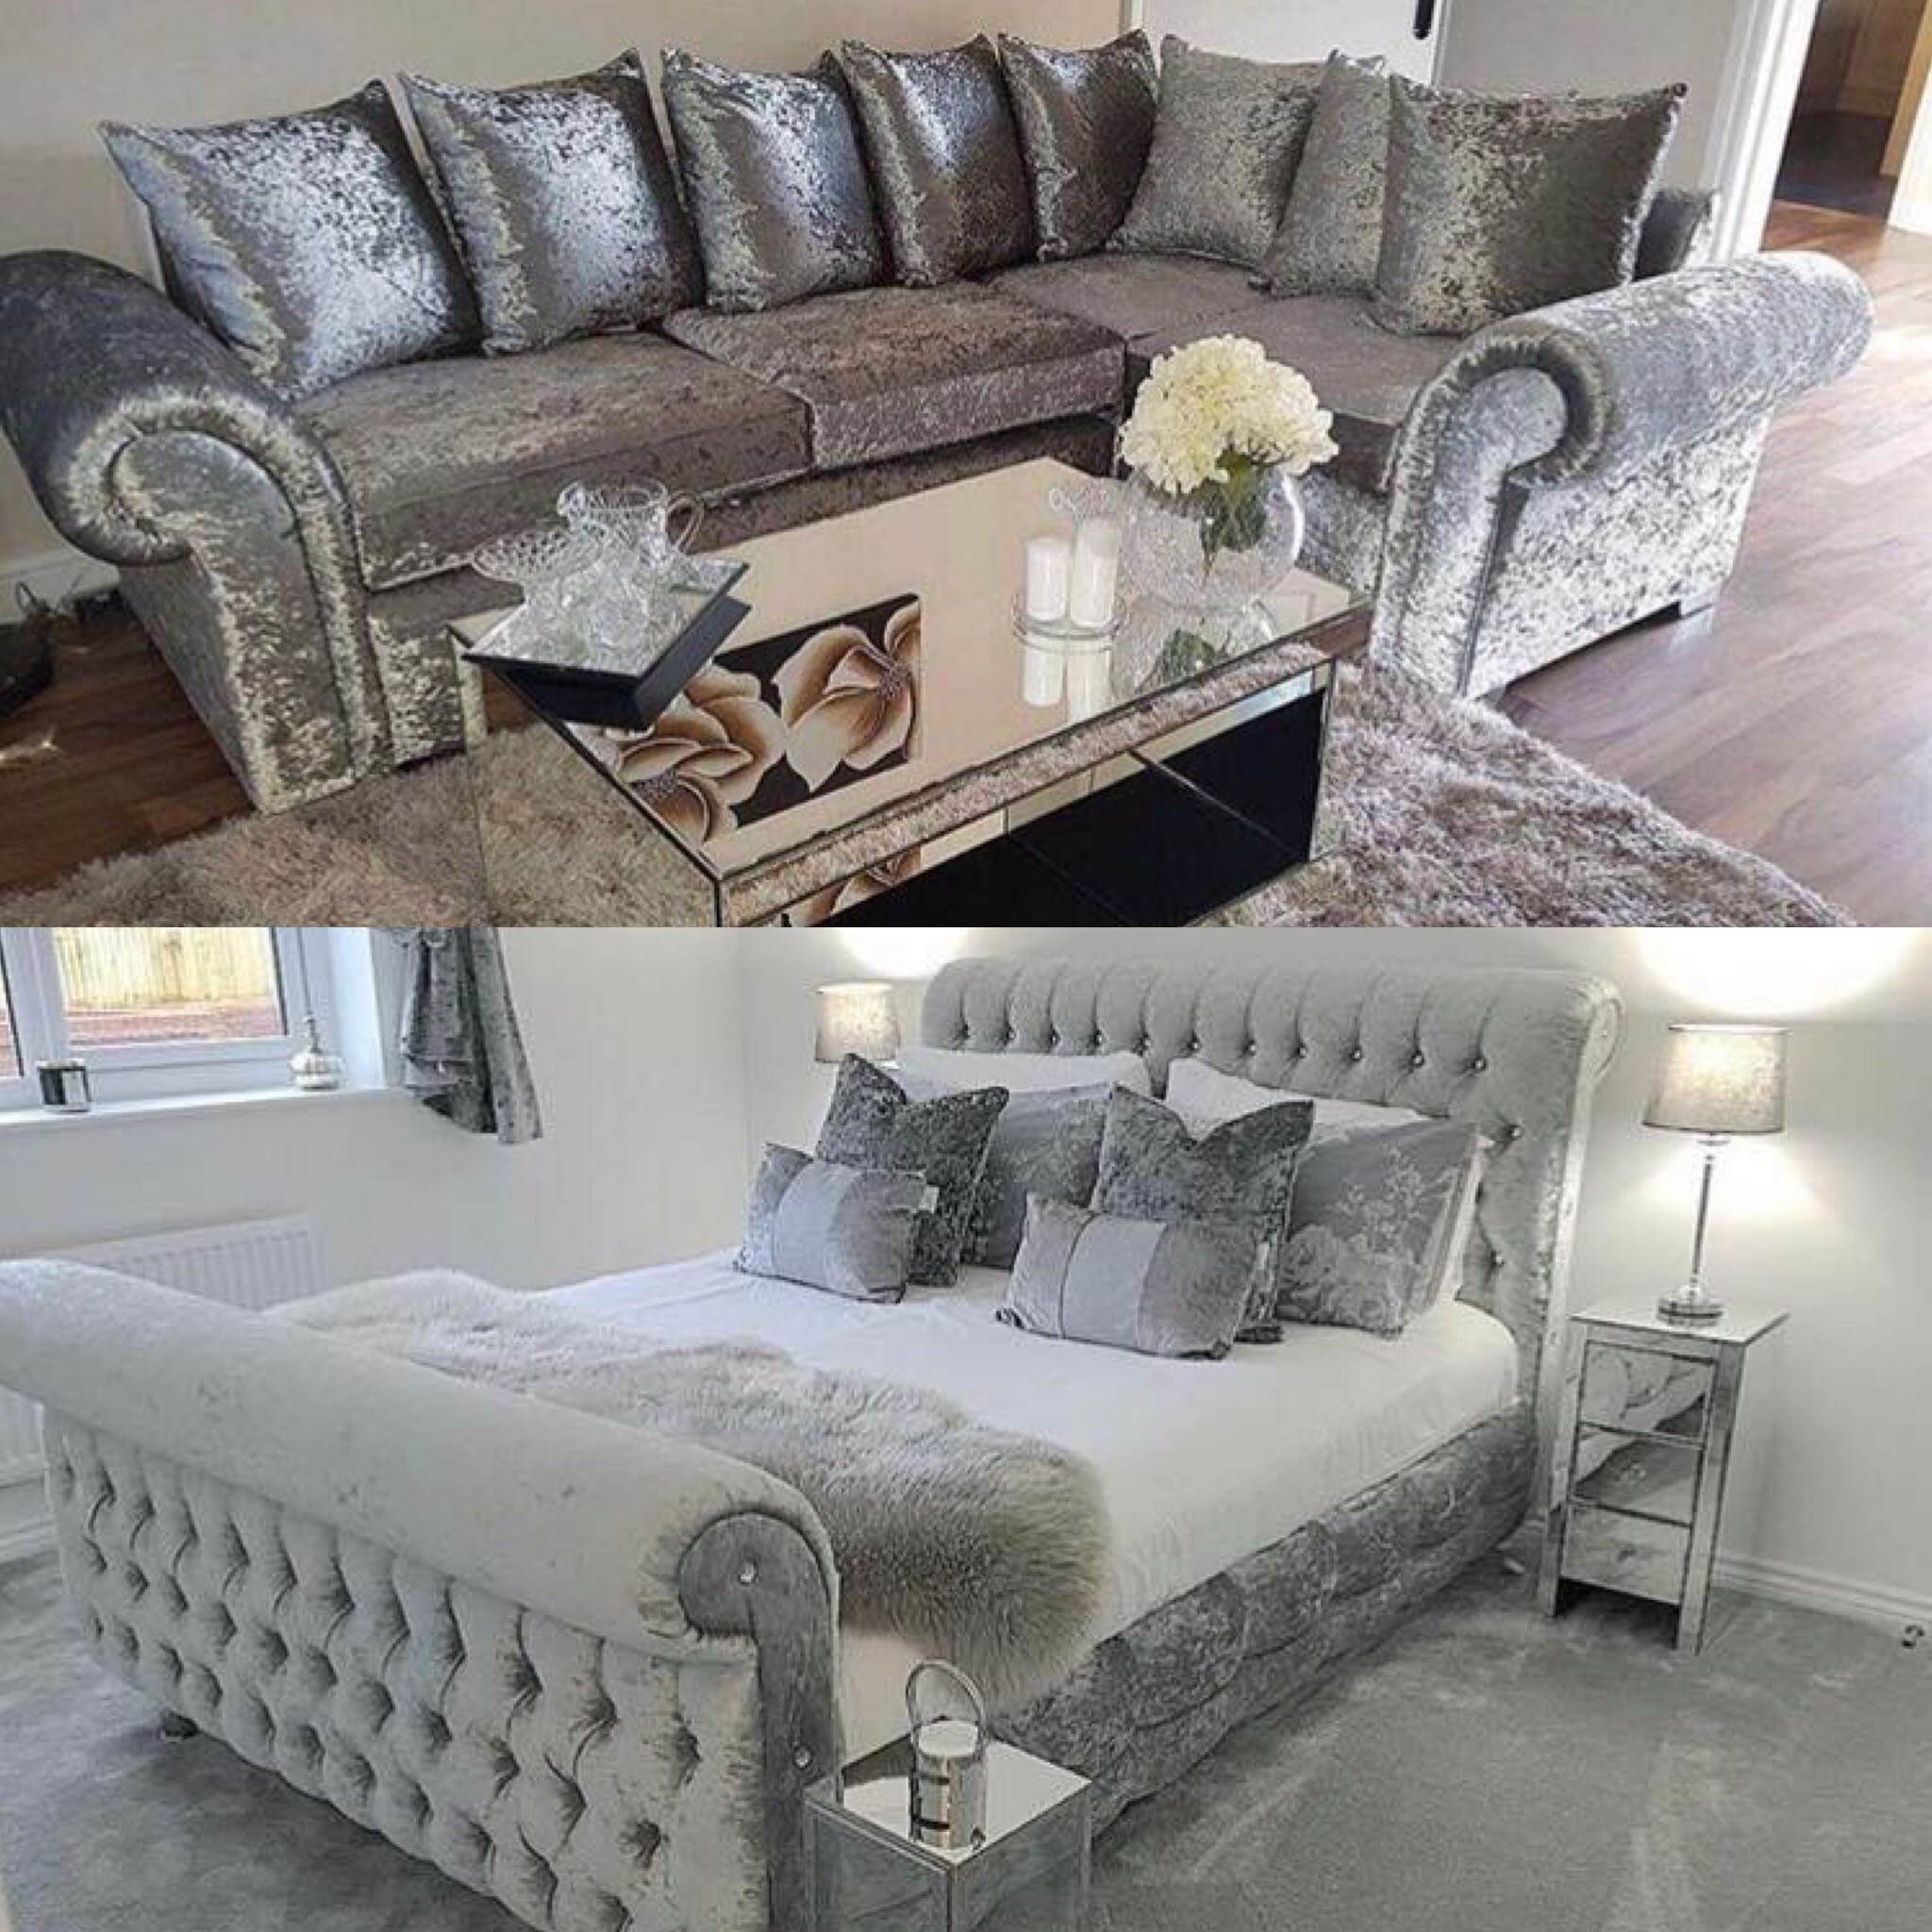 The Luxury Bed Company Great Beds Sofas And Mattresses At Great Prices